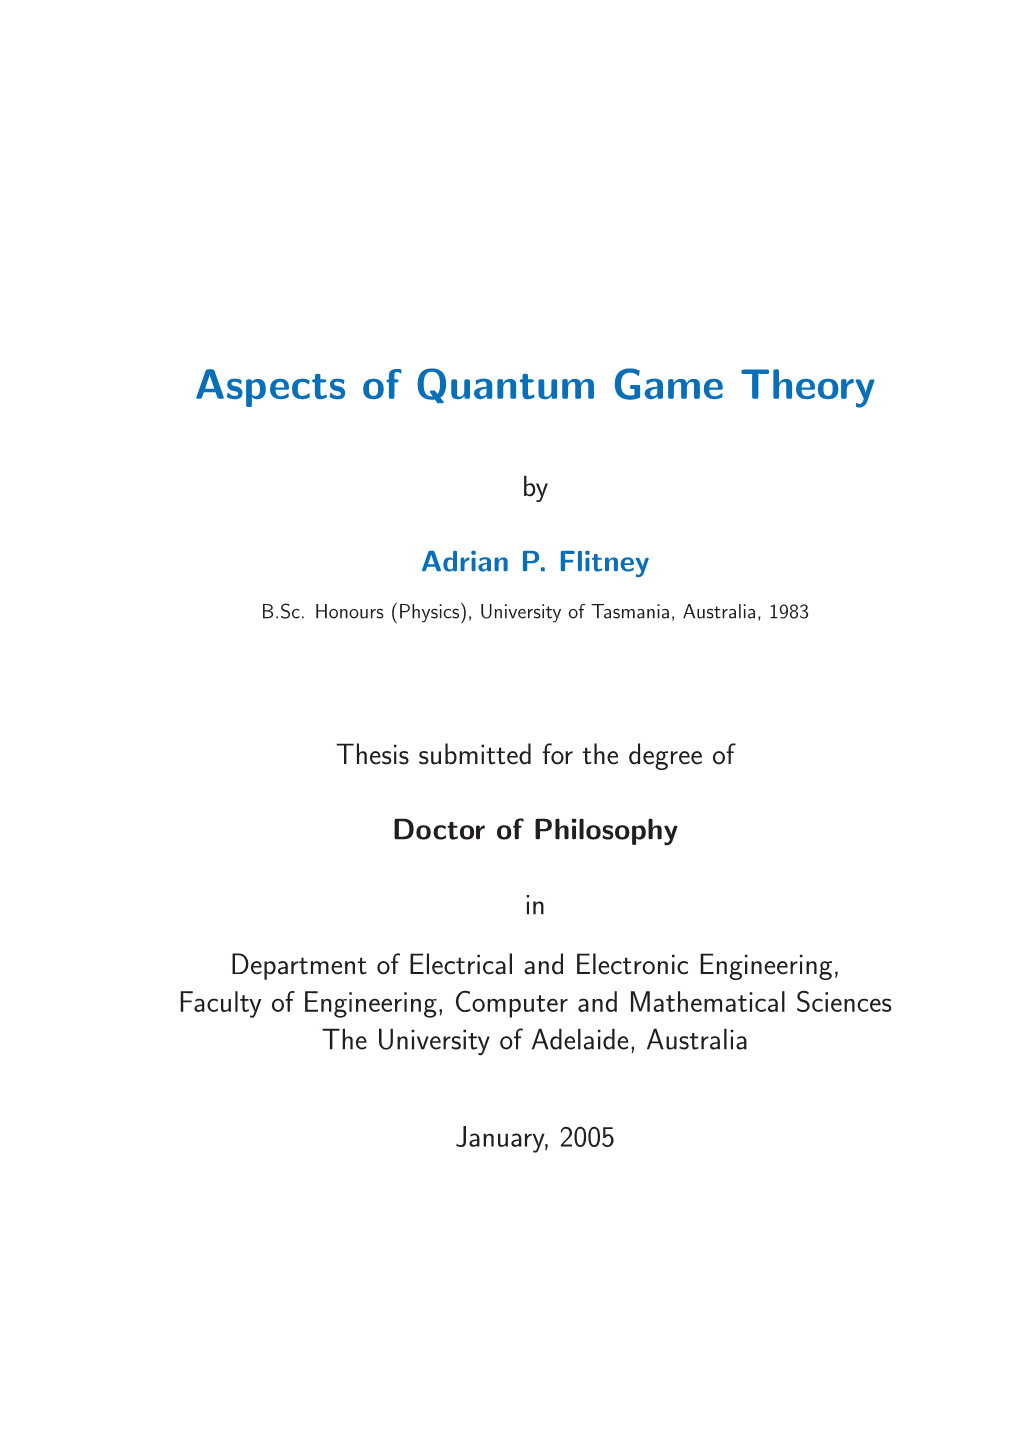 Aspects of Quantum Game Theory